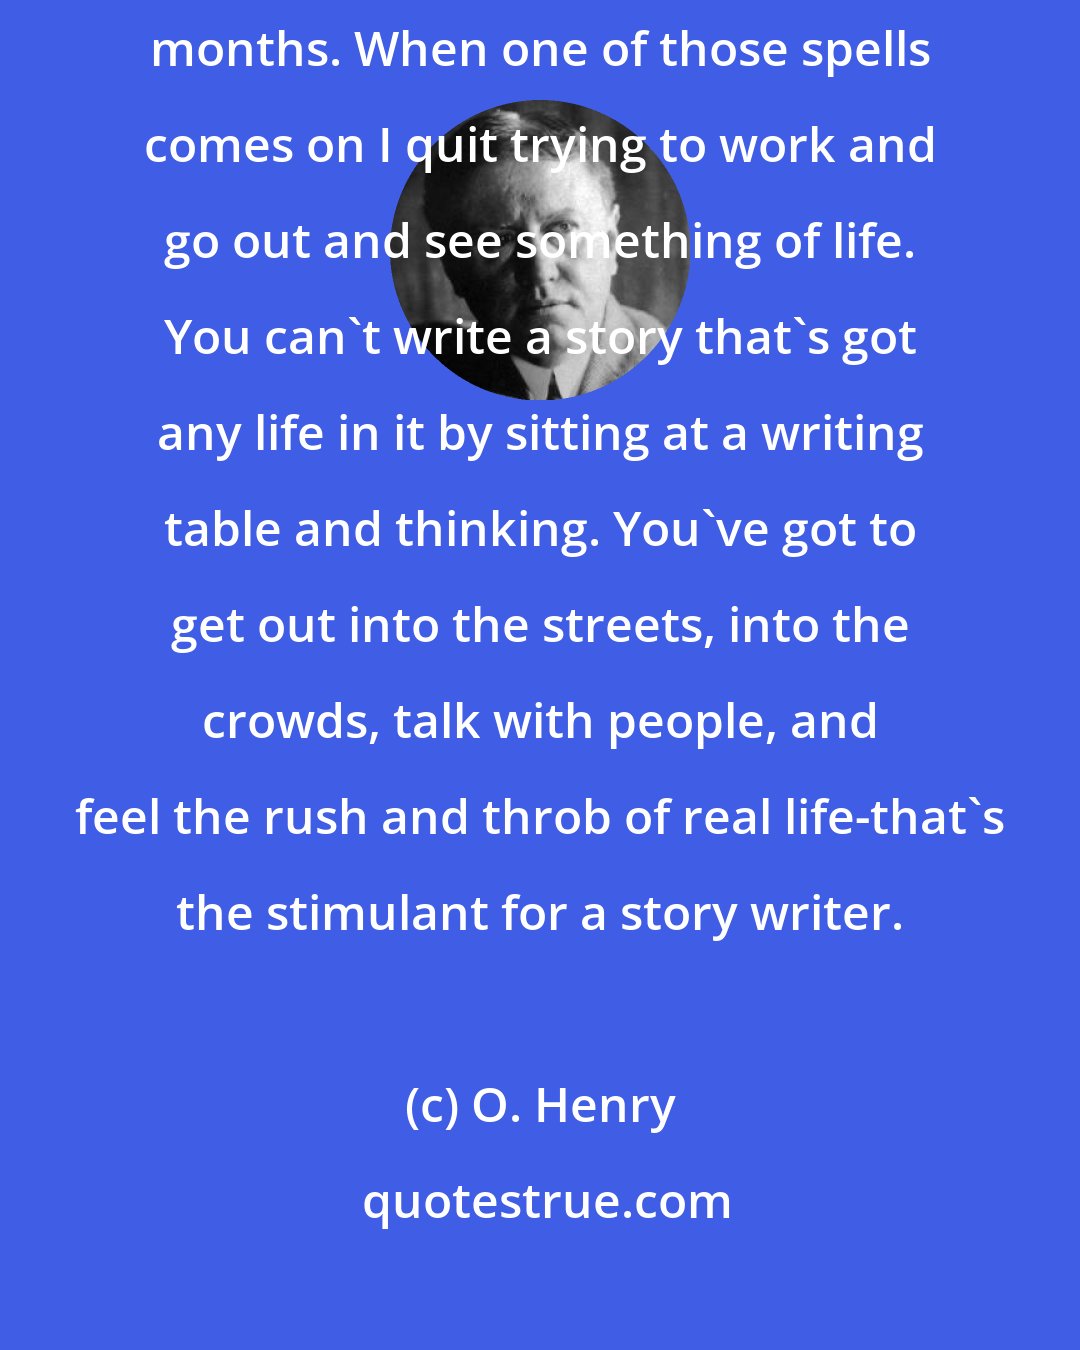 O. Henry: Yes, I get dry spells. Sometimes I can't turn out a thing for three months. When one of those spells comes on I quit trying to work and go out and see something of life. You can't write a story that's got any life in it by sitting at a writing table and thinking. You've got to get out into the streets, into the crowds, talk with people, and feel the rush and throb of real life-that's the stimulant for a story writer.